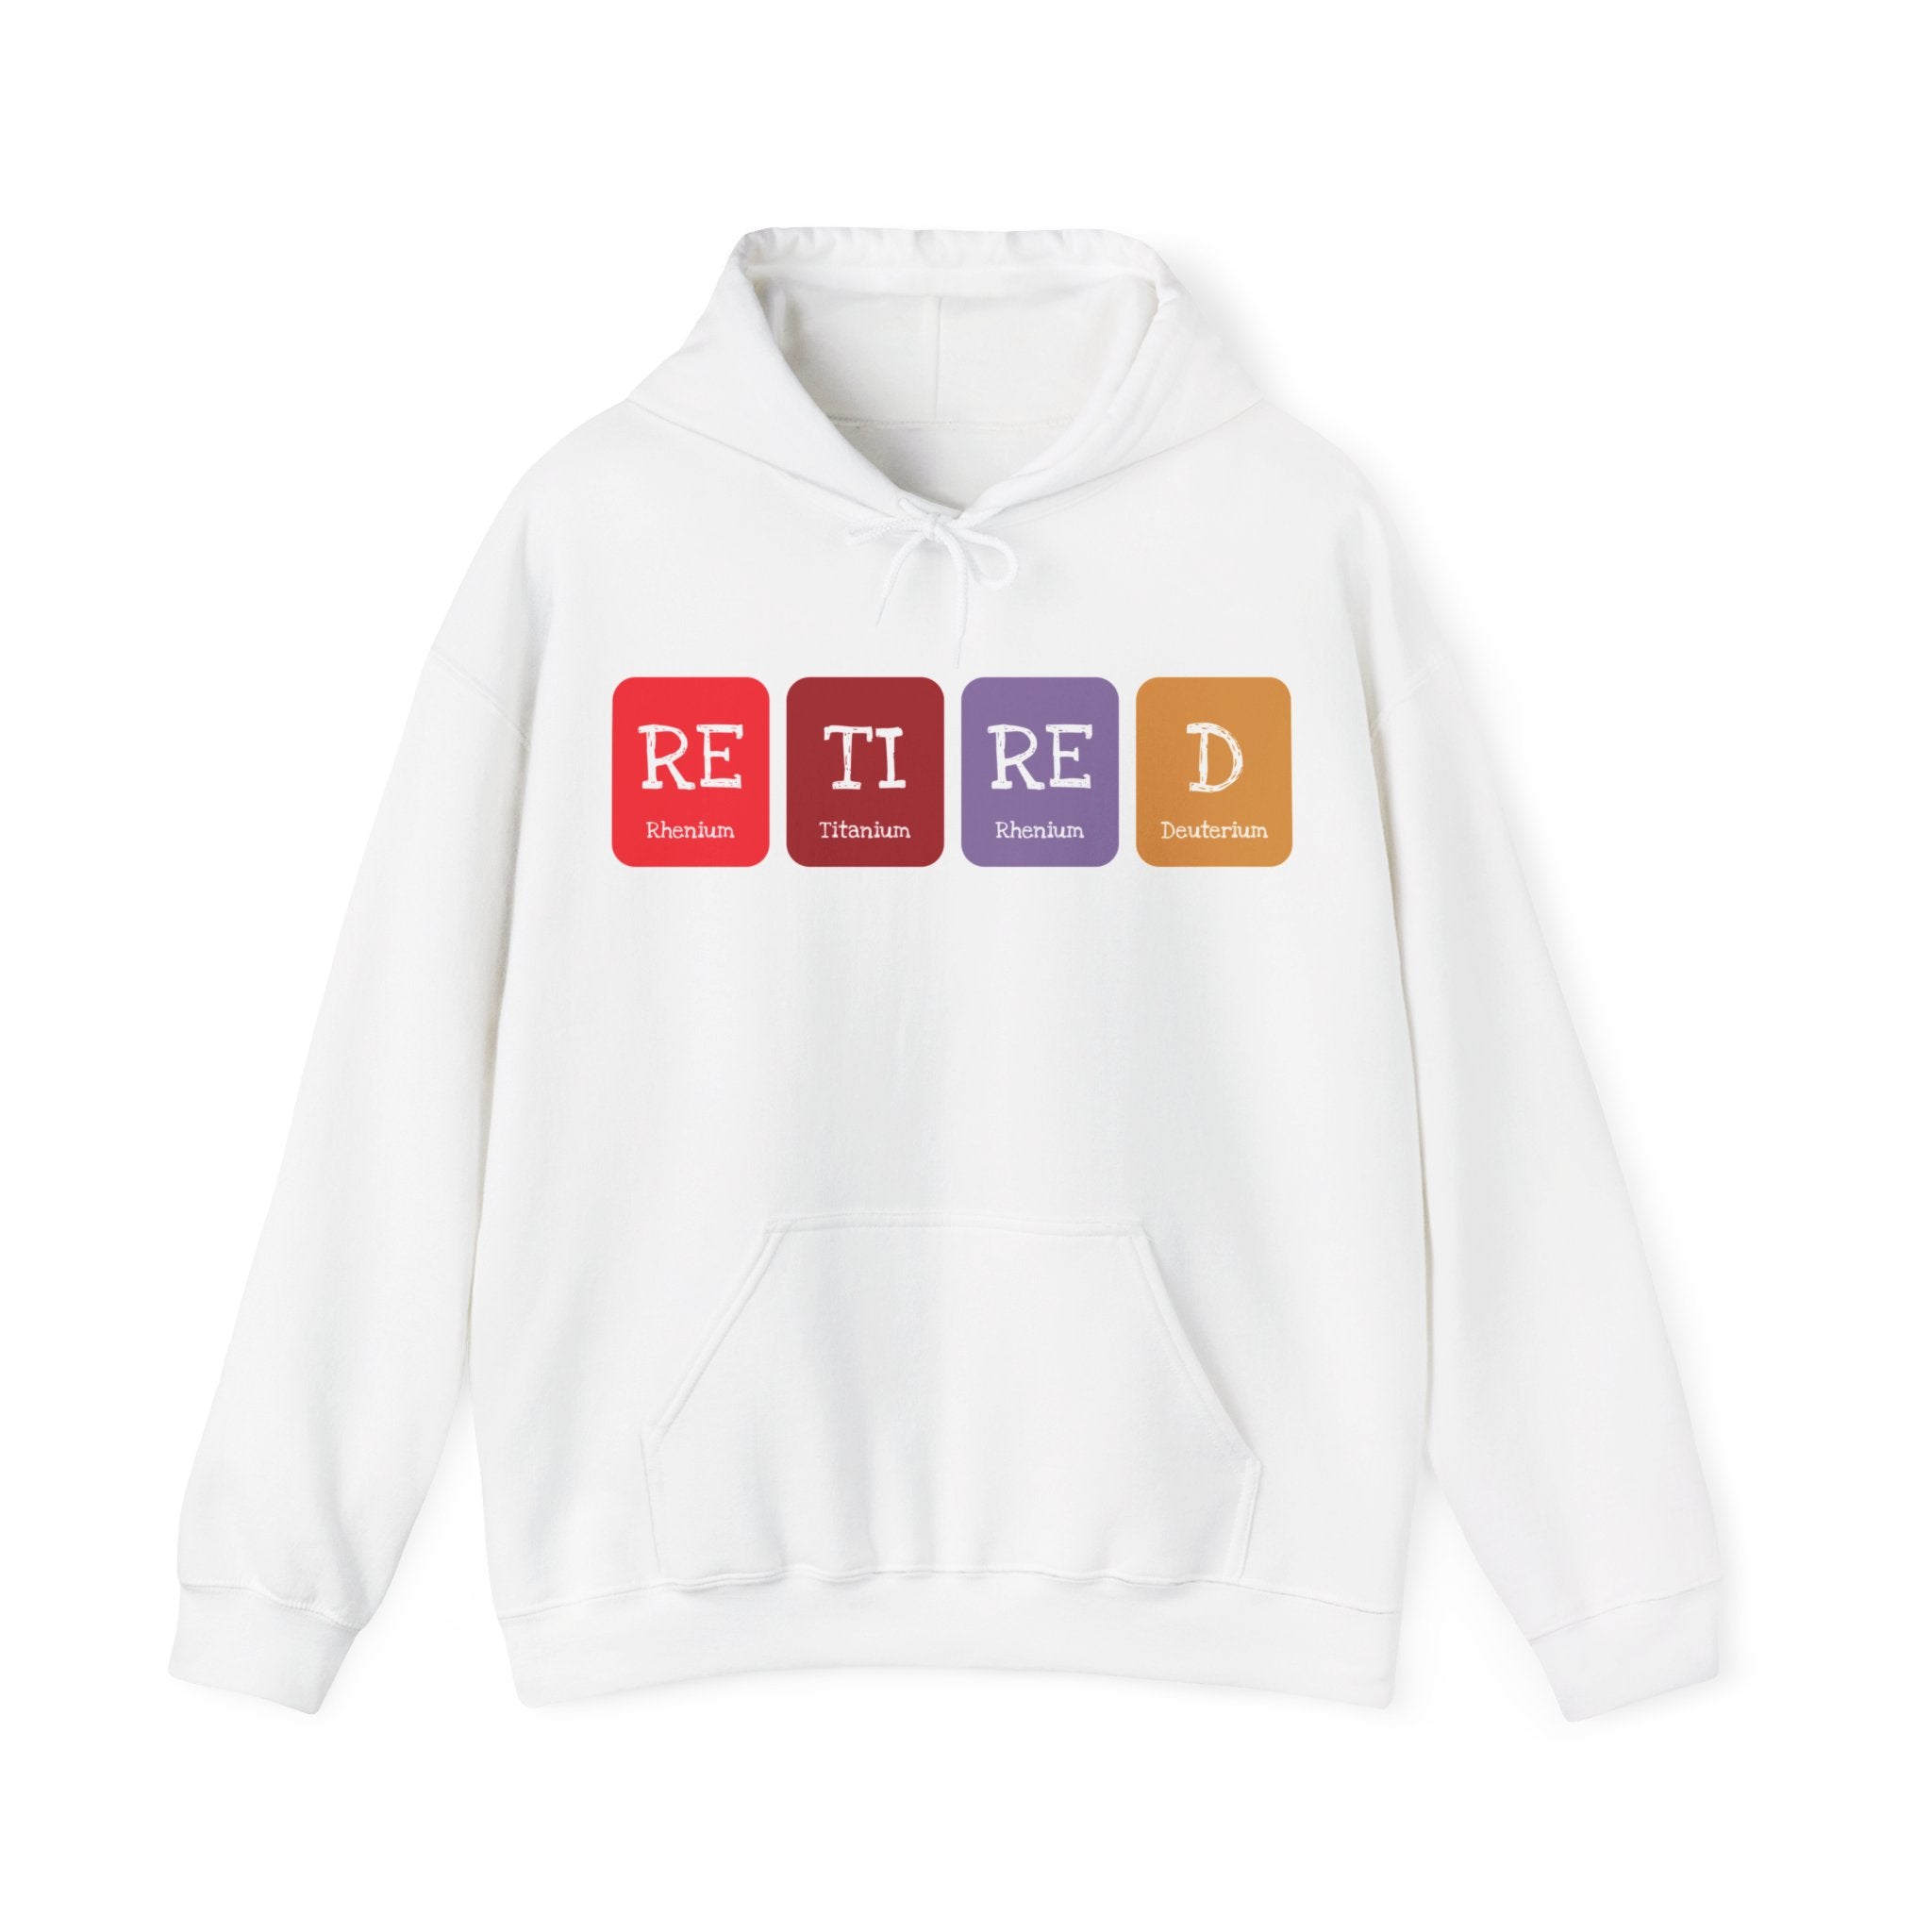 Retired - Hooded Sweatshirt with a comfy fit, featuring the word "RETIRED" spelled out using blocks with chemical elements: Rhenium (Re), Titanium (Ti), Rhenium (Re), and Dubnium (Db). This unique piece is perfect for making a subtle fashion statement.